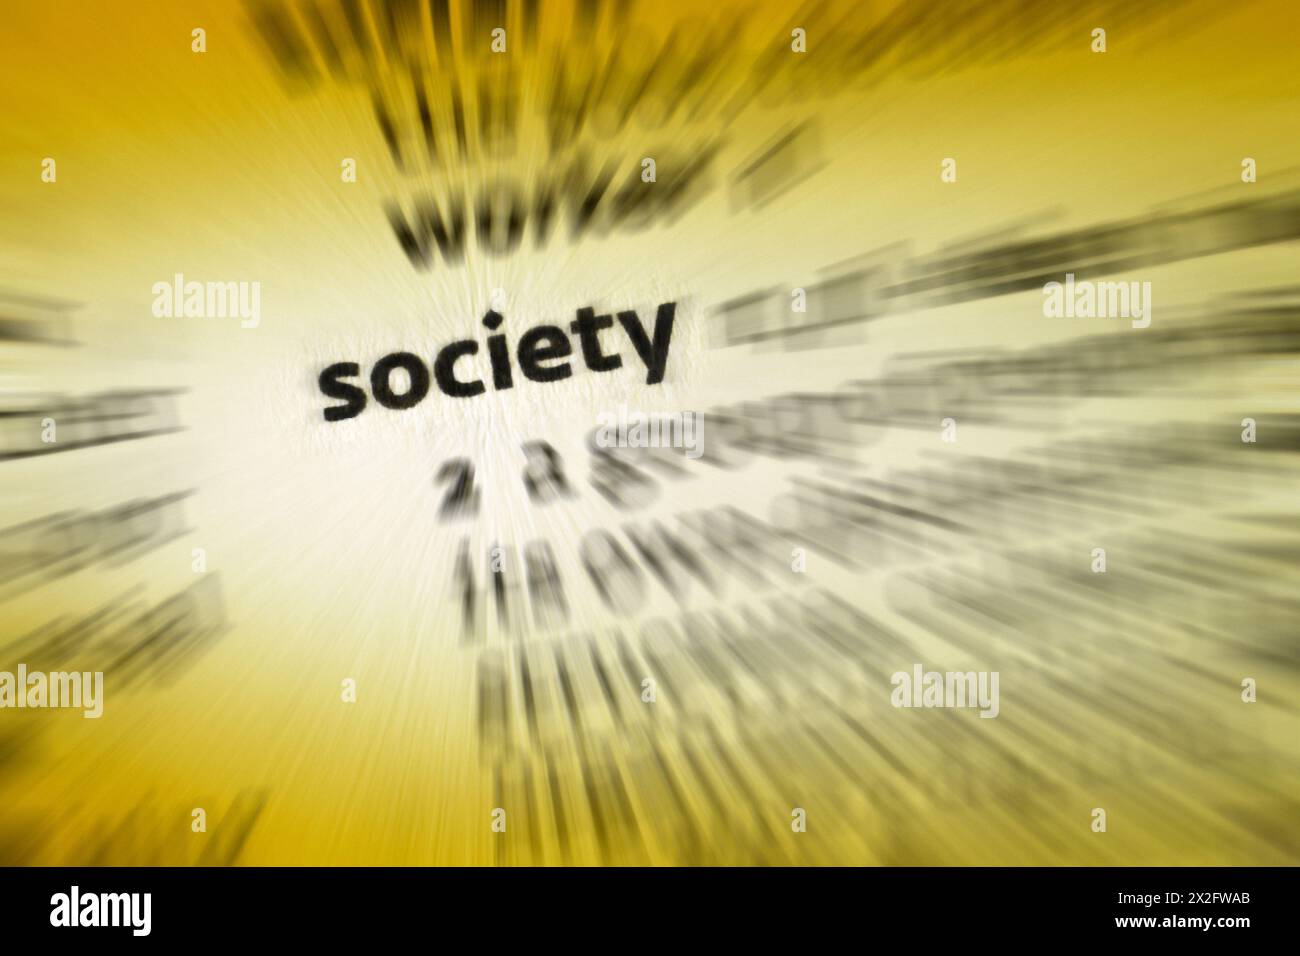 Society - the community of people living in a particular country or region and having shared customs, laws, and organizations. Stock Photo